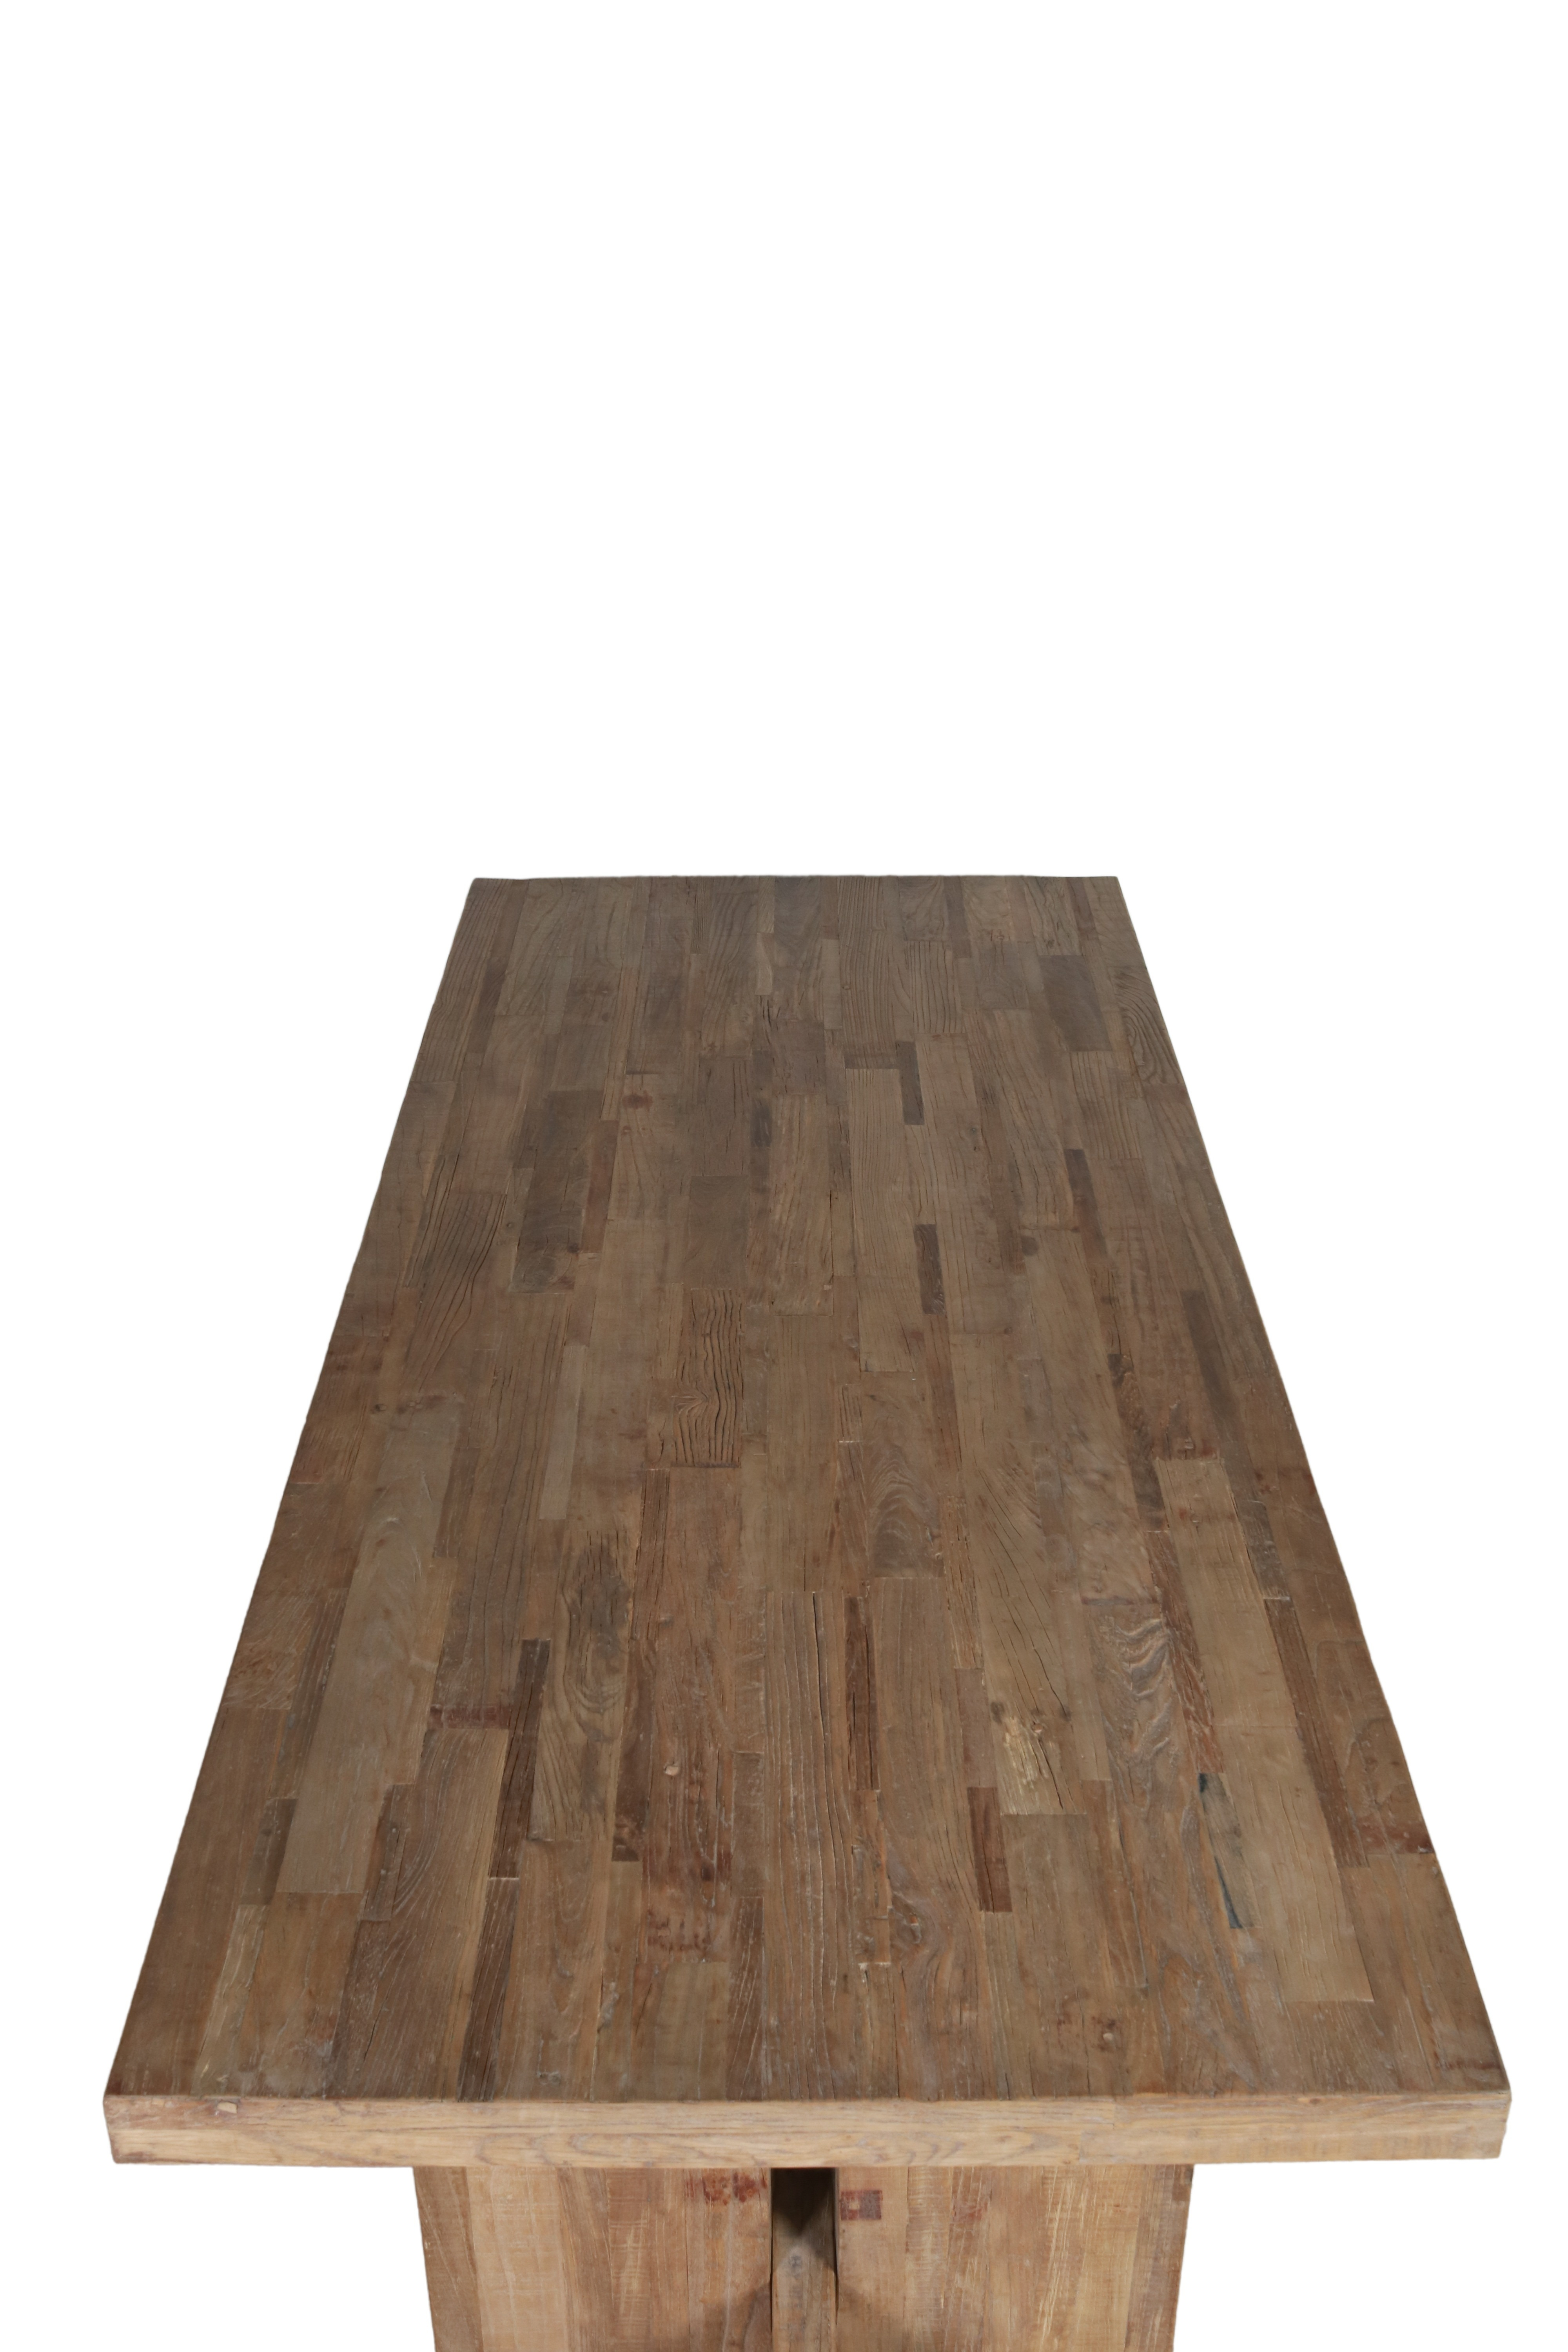 Elm wood dining table 